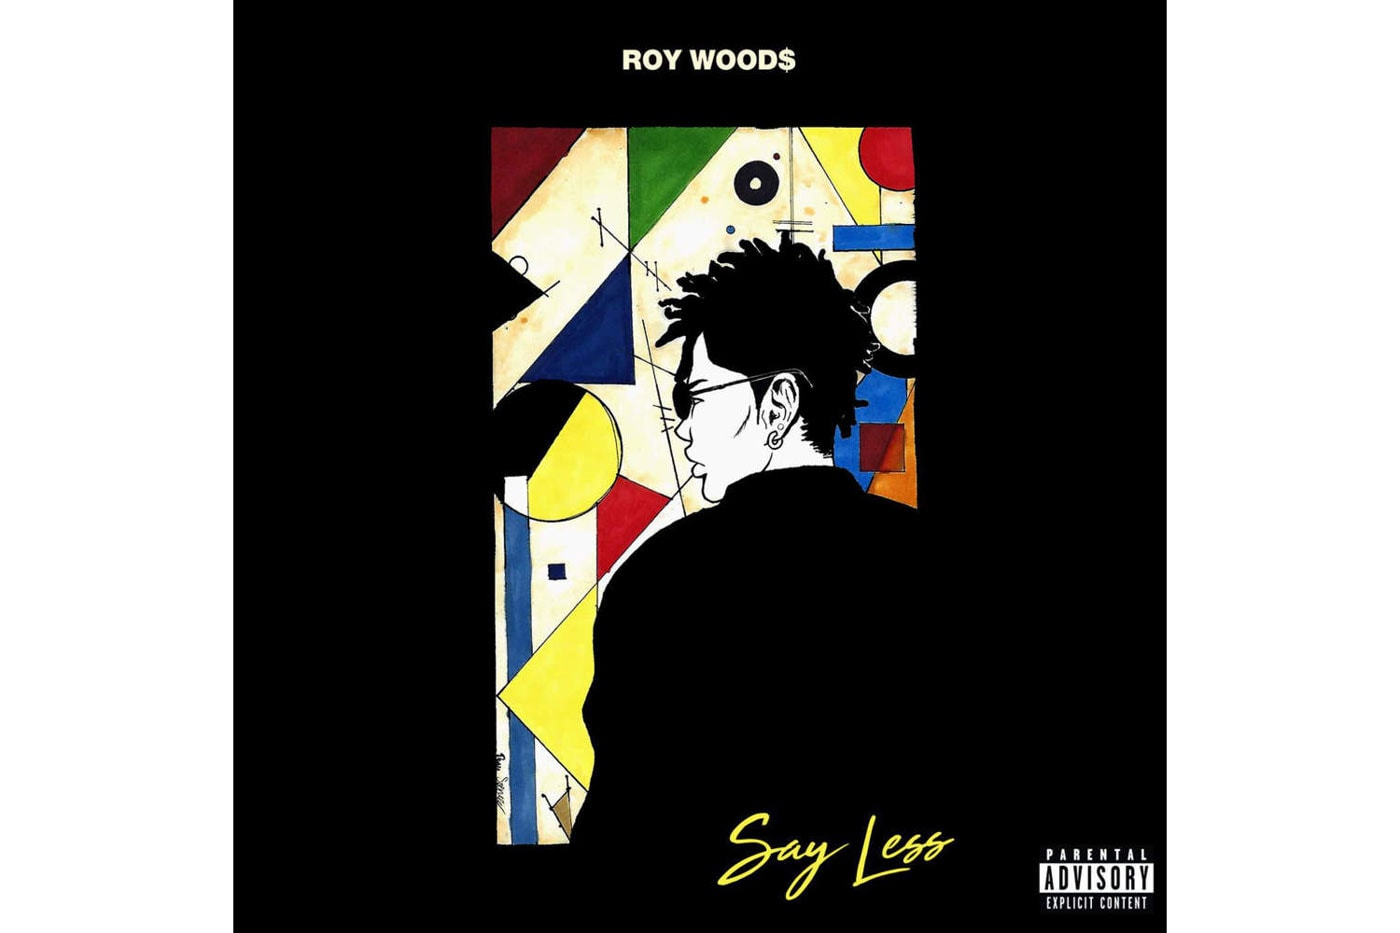 Roy Woods New Album Say Less ovo sound octobers very own drake toronto music lp style fashion clothing streetwear bape a bathing ape supreme gucci mane stone island jewelry Denzel Spencer